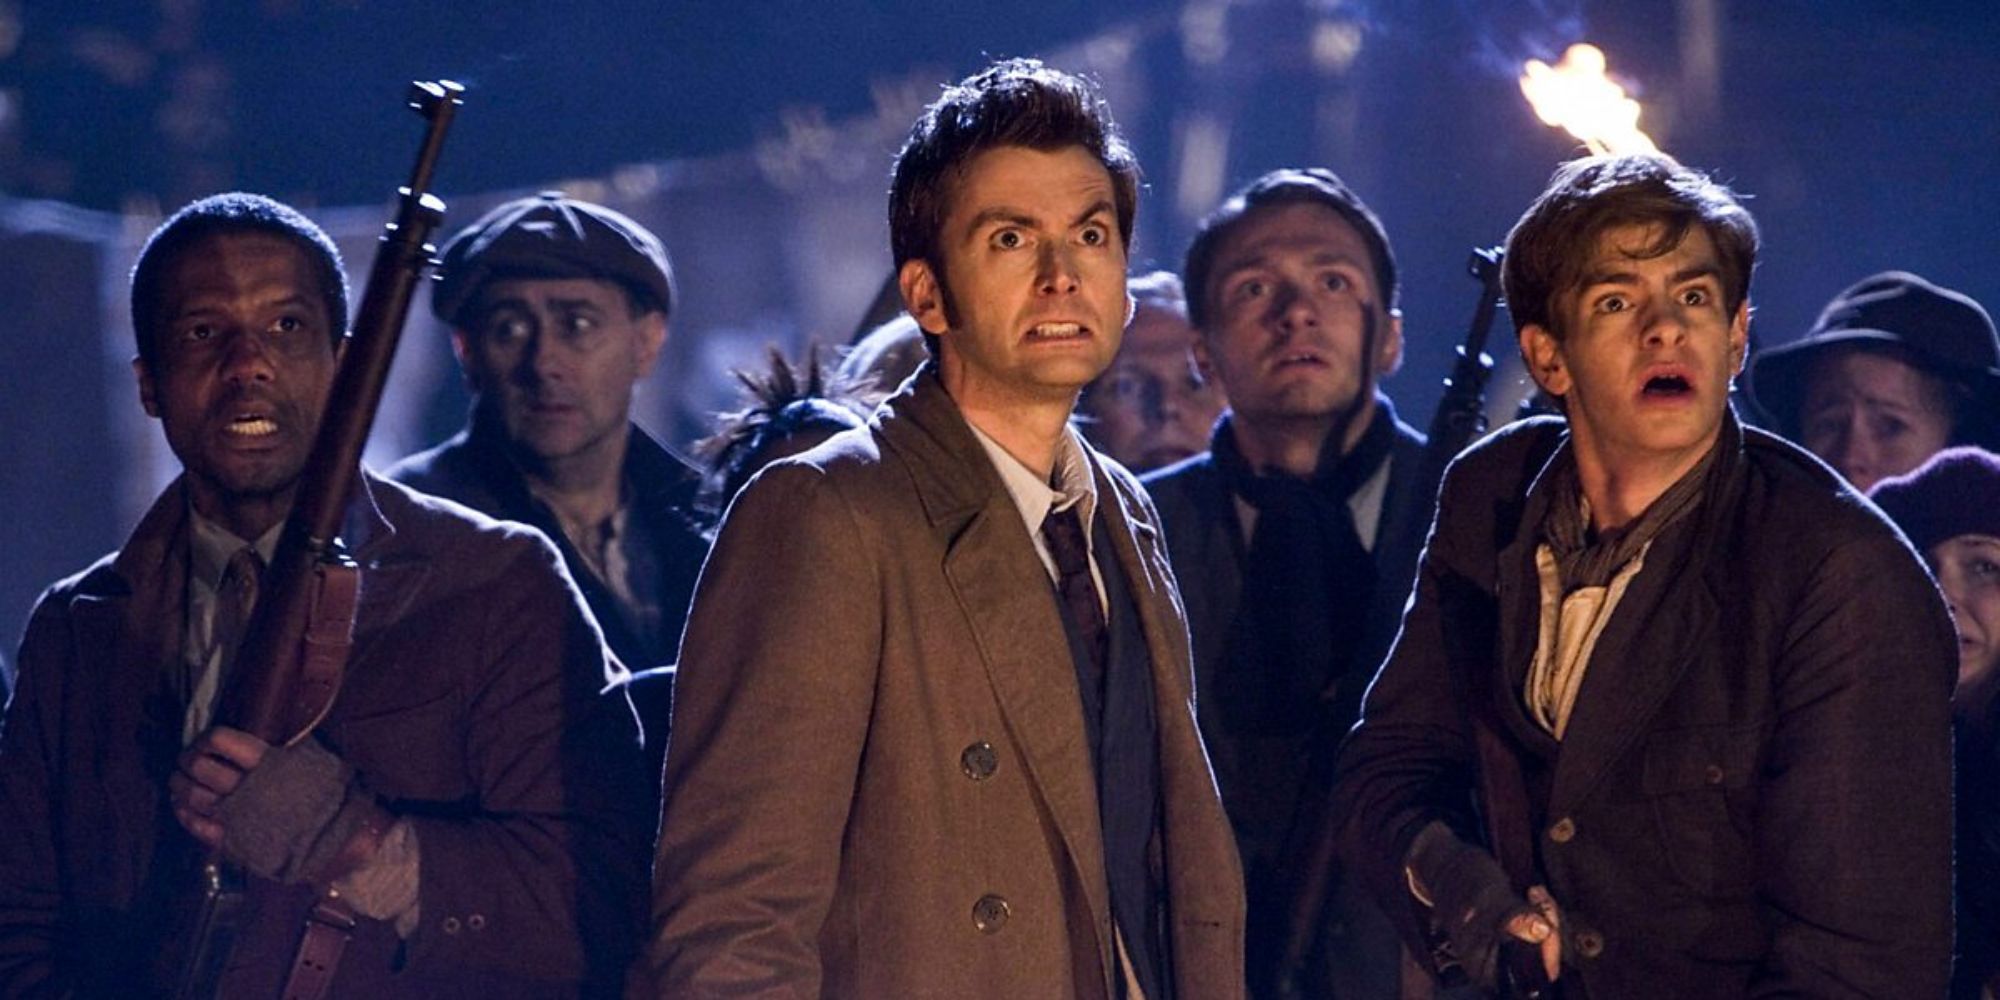 the tenth doctor 